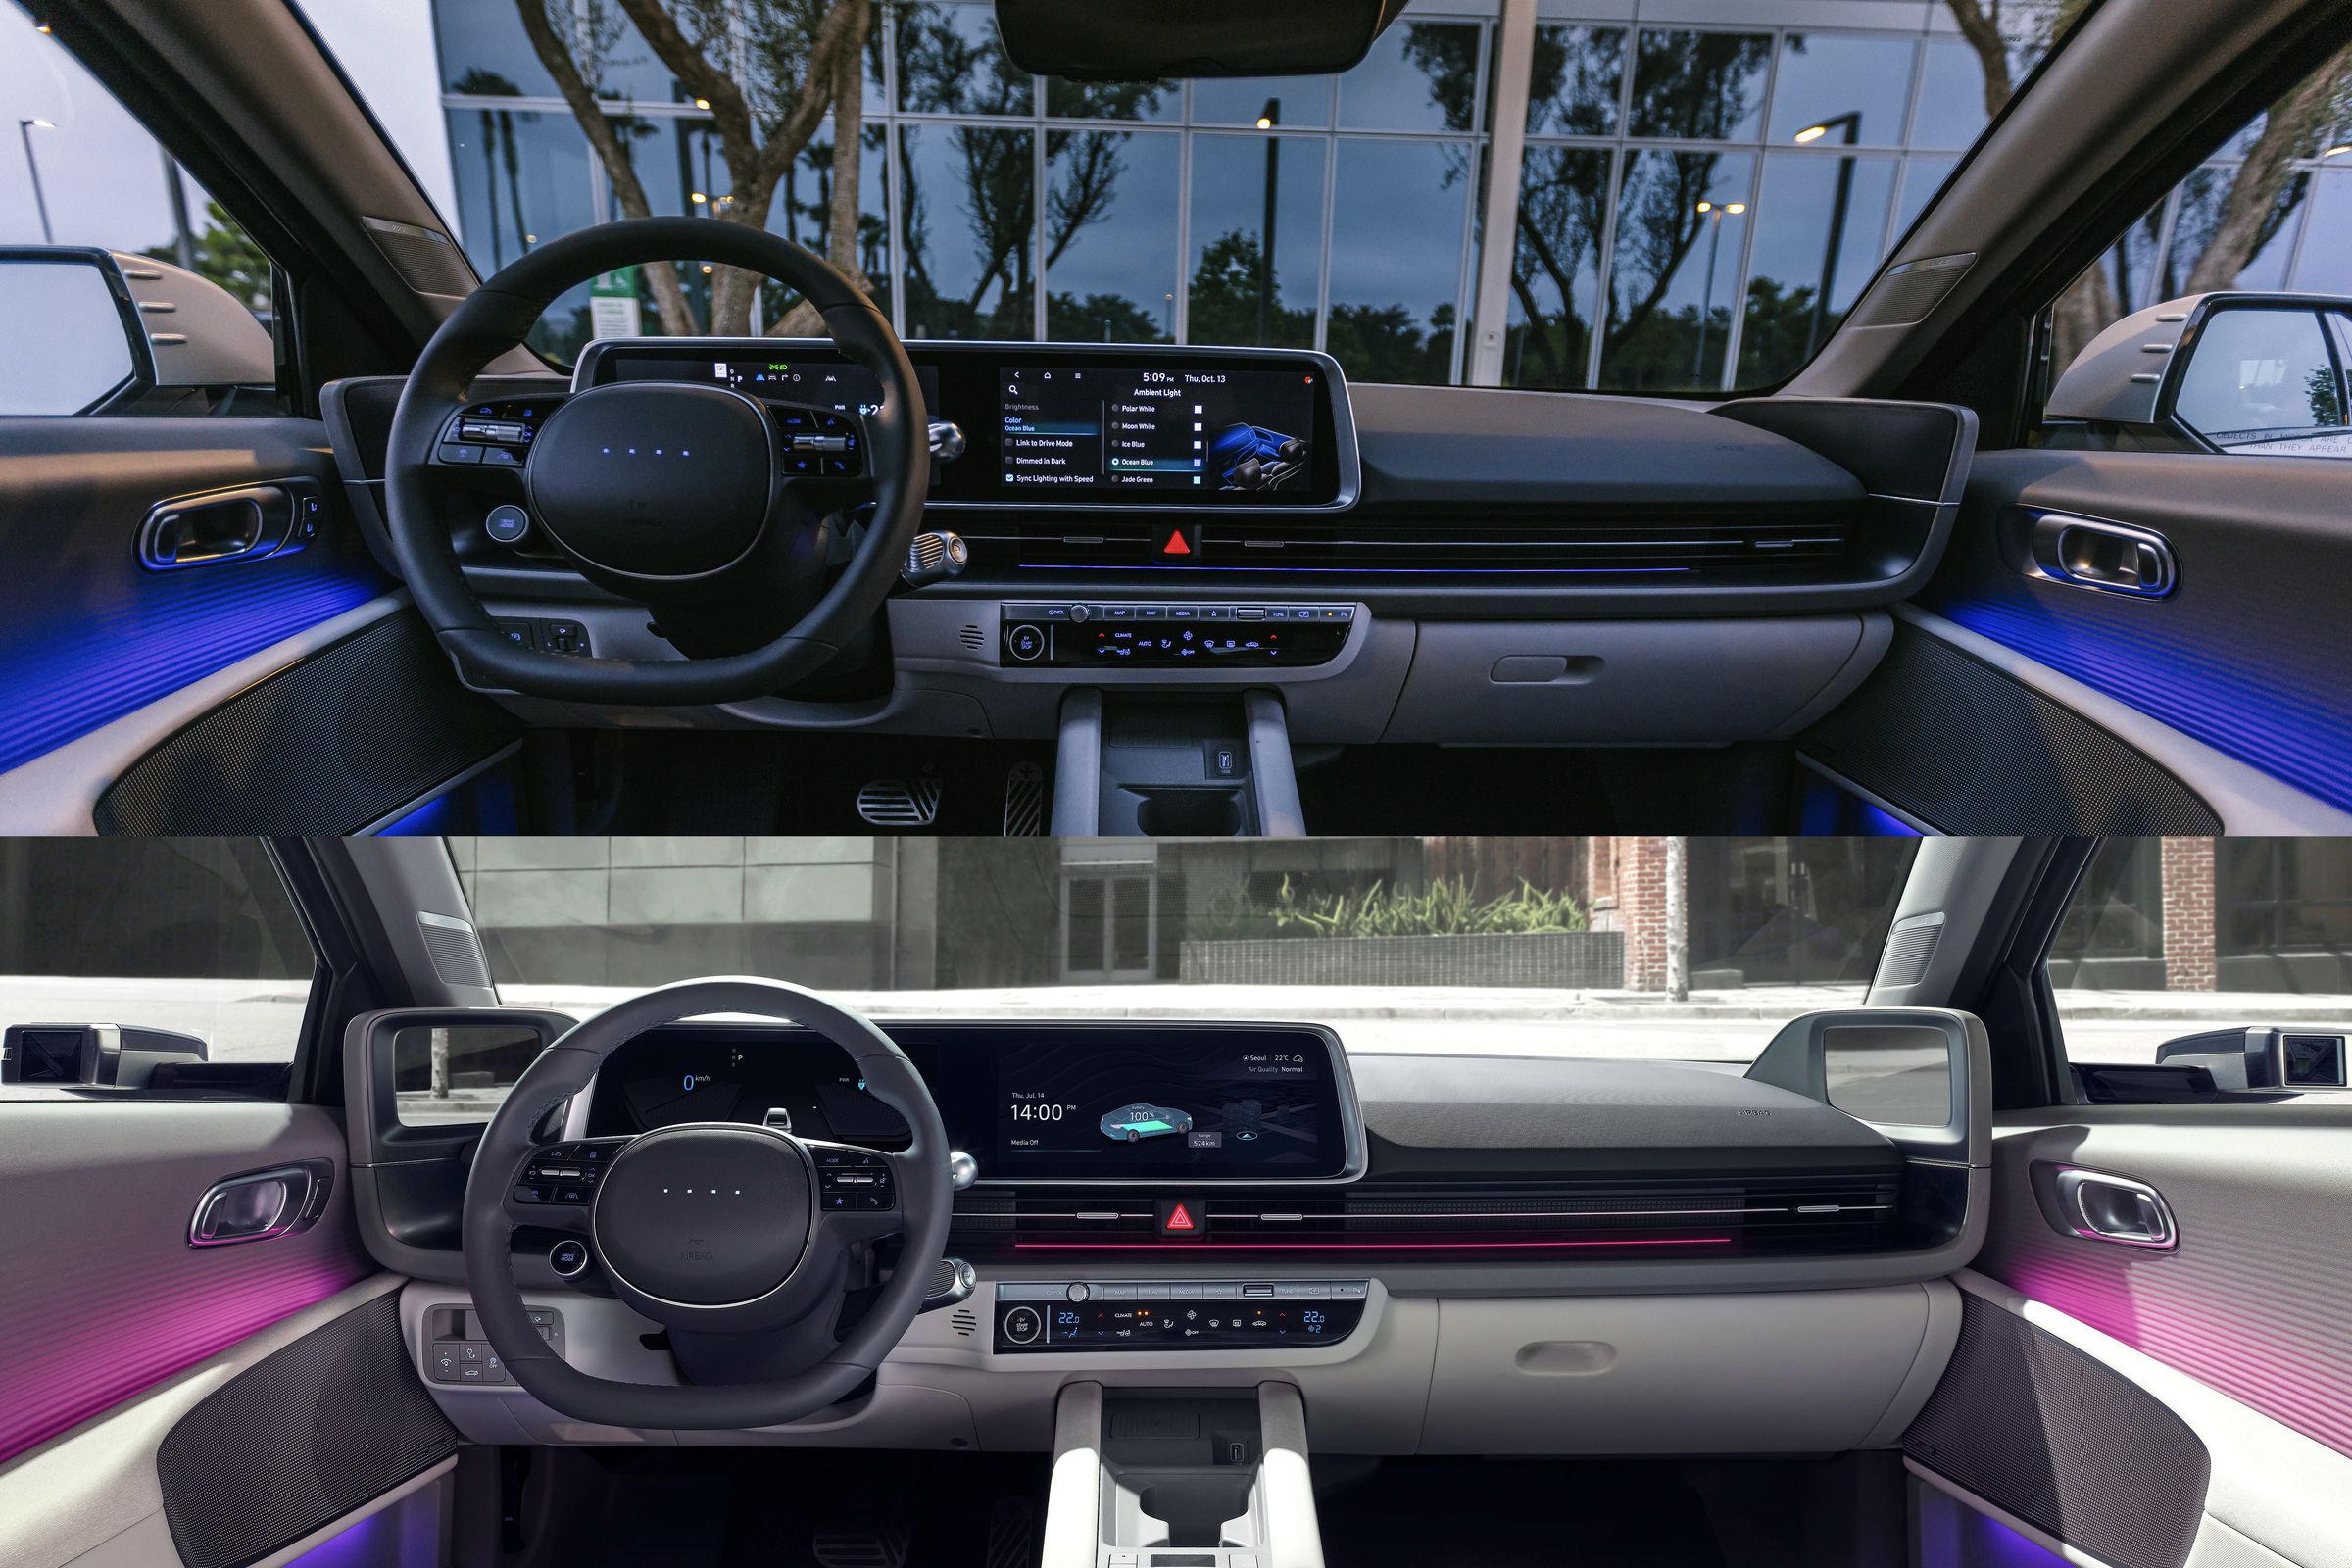 Top: Ioniq 6 with traditional mirrors. Bottom: Not US-friendly digital side mirrors with cameras on the outside and displays on the inside.